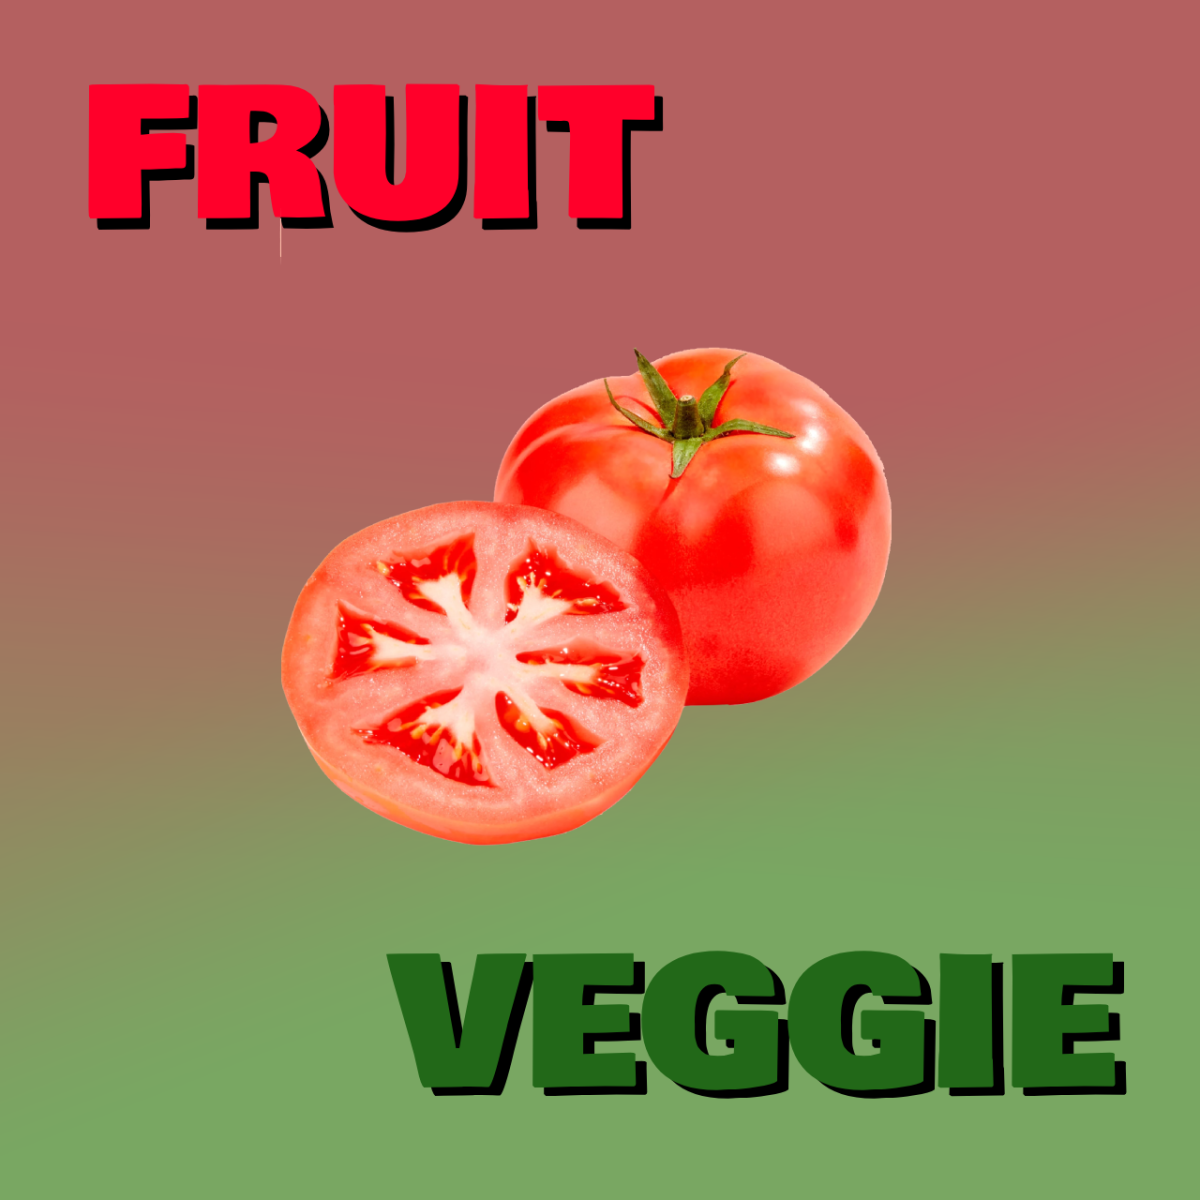 Tomato - A Fruit or Vegetable